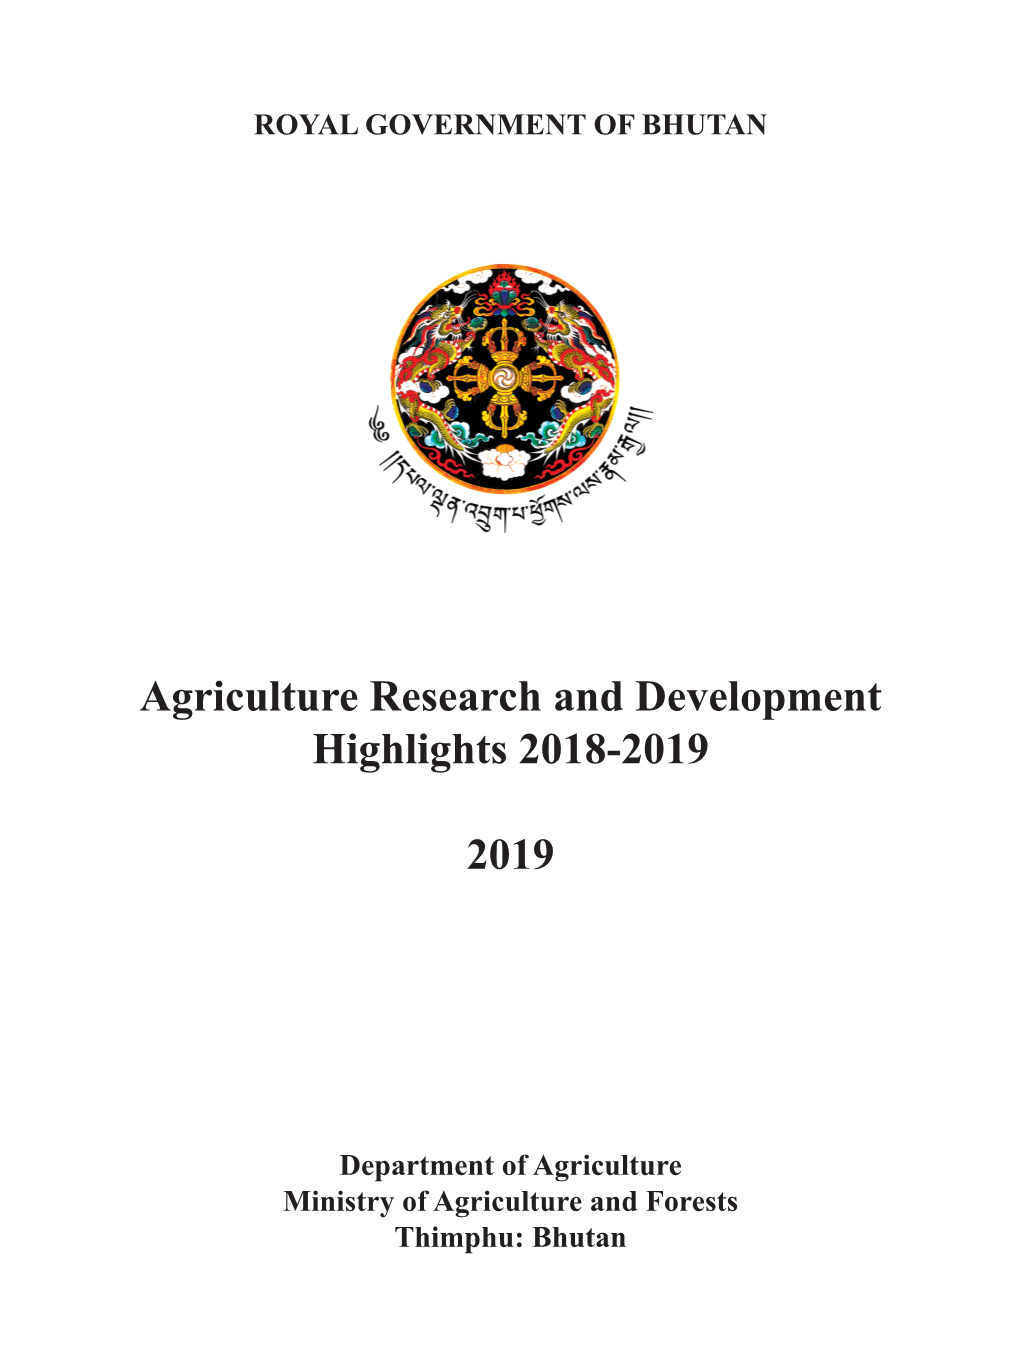 Agriculture Research and Development Highlights 2018-19